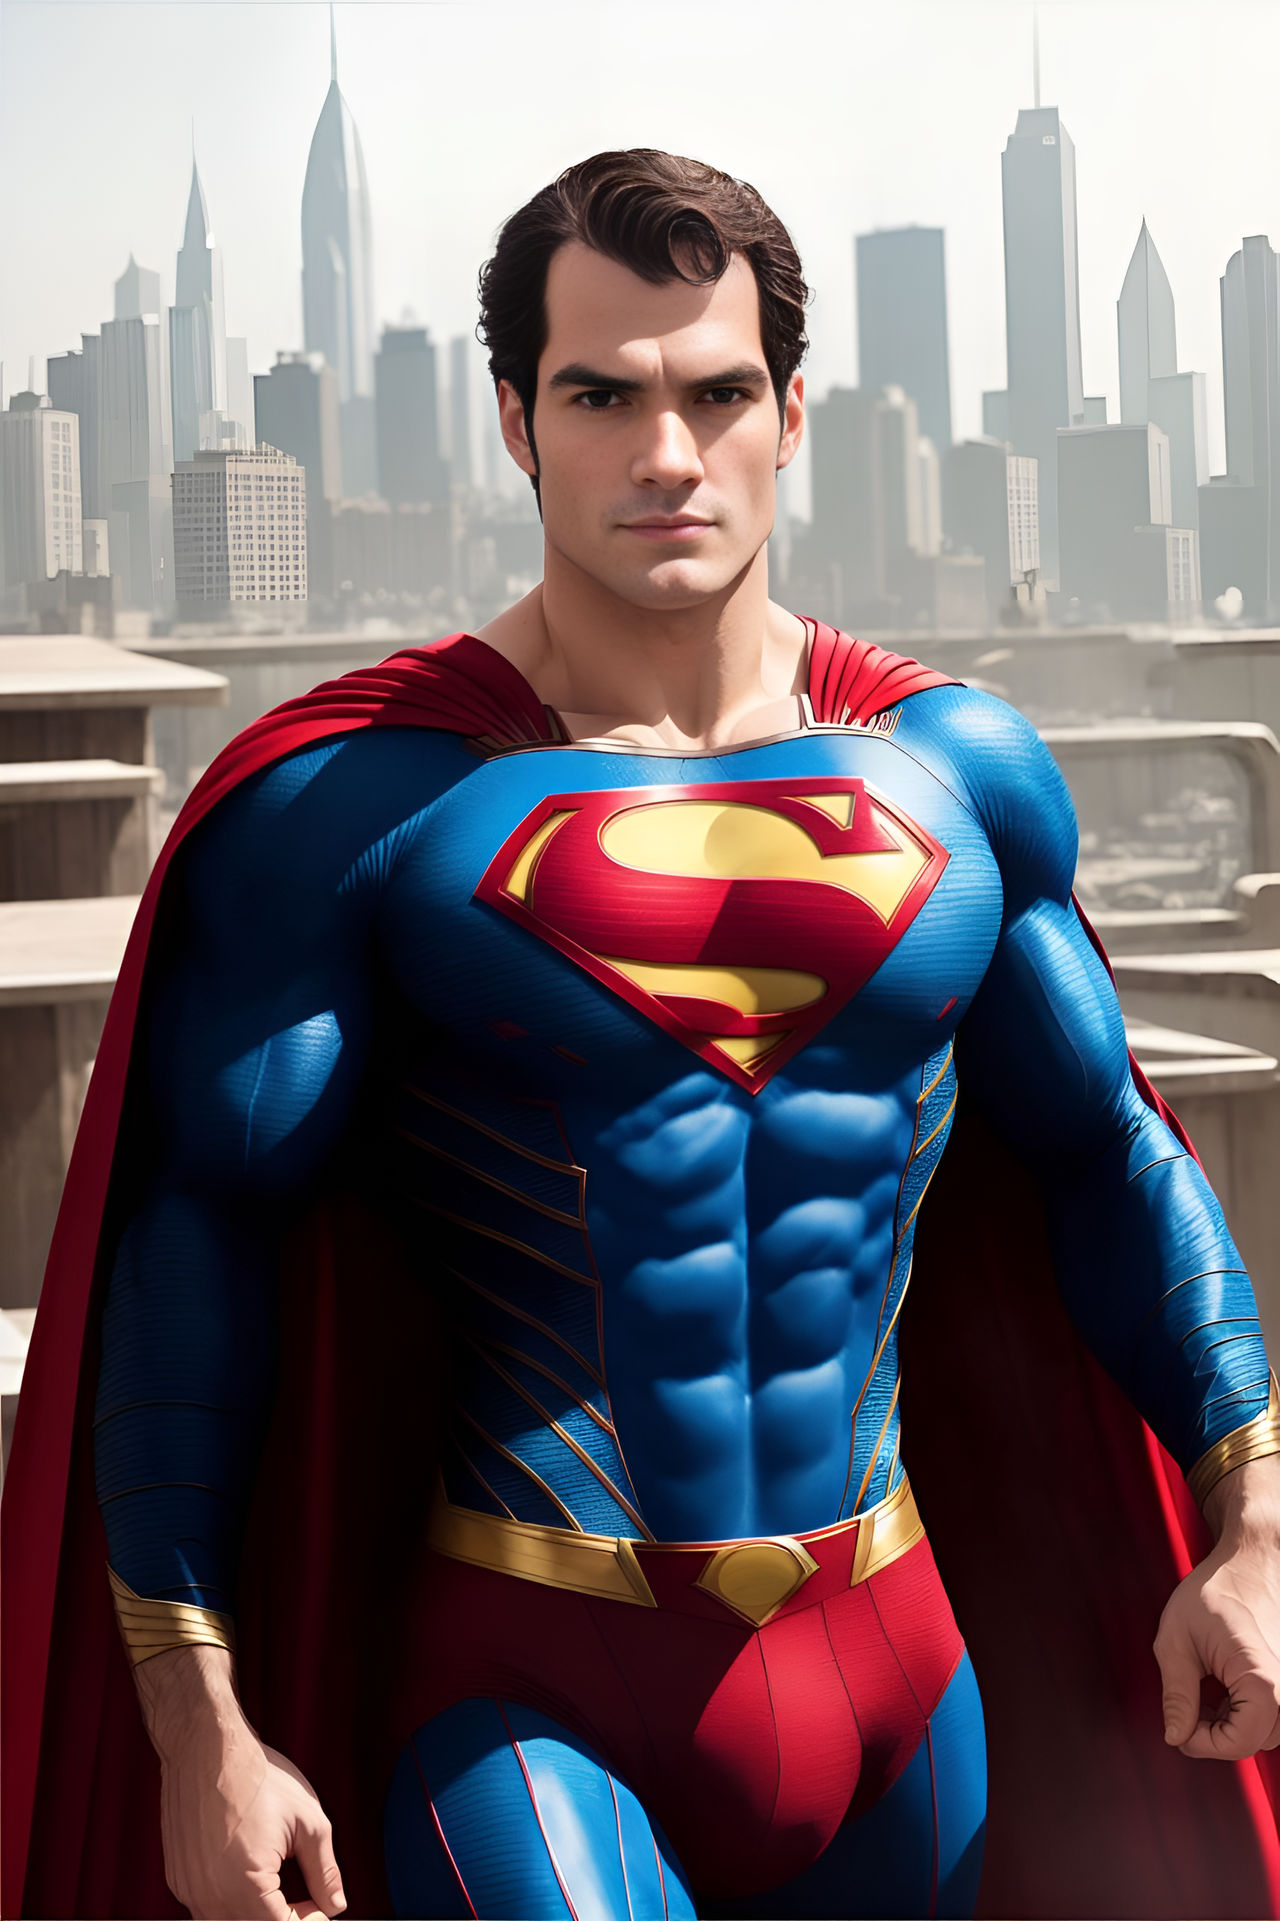 Cavill's Superman (Underwear Over Pants) by CristianoRohling on DeviantArt